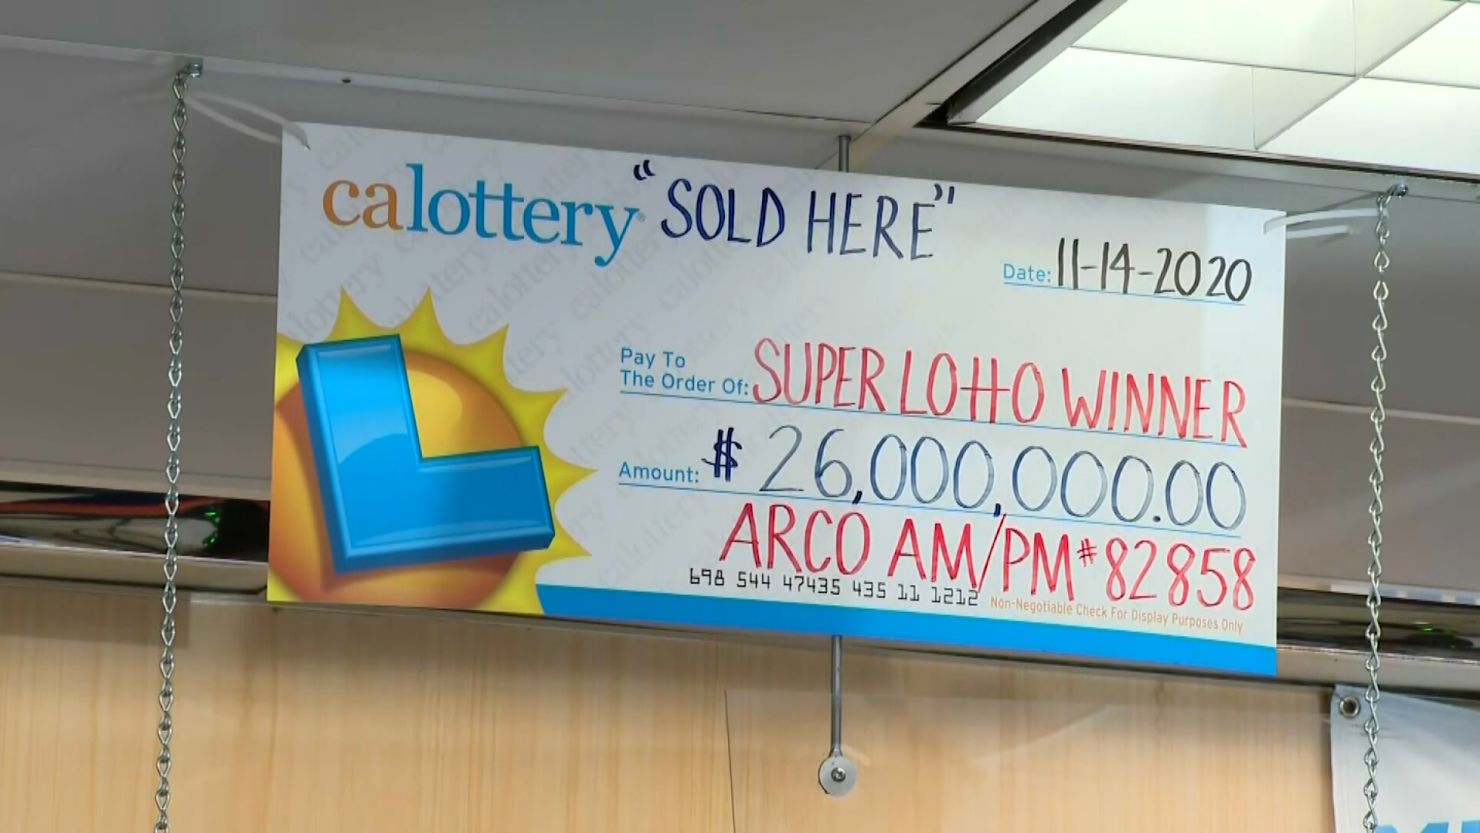 The winning ticket was sold at a ARCO AM/PM convenience store in Norwalk, a suburb of Los Angeles.